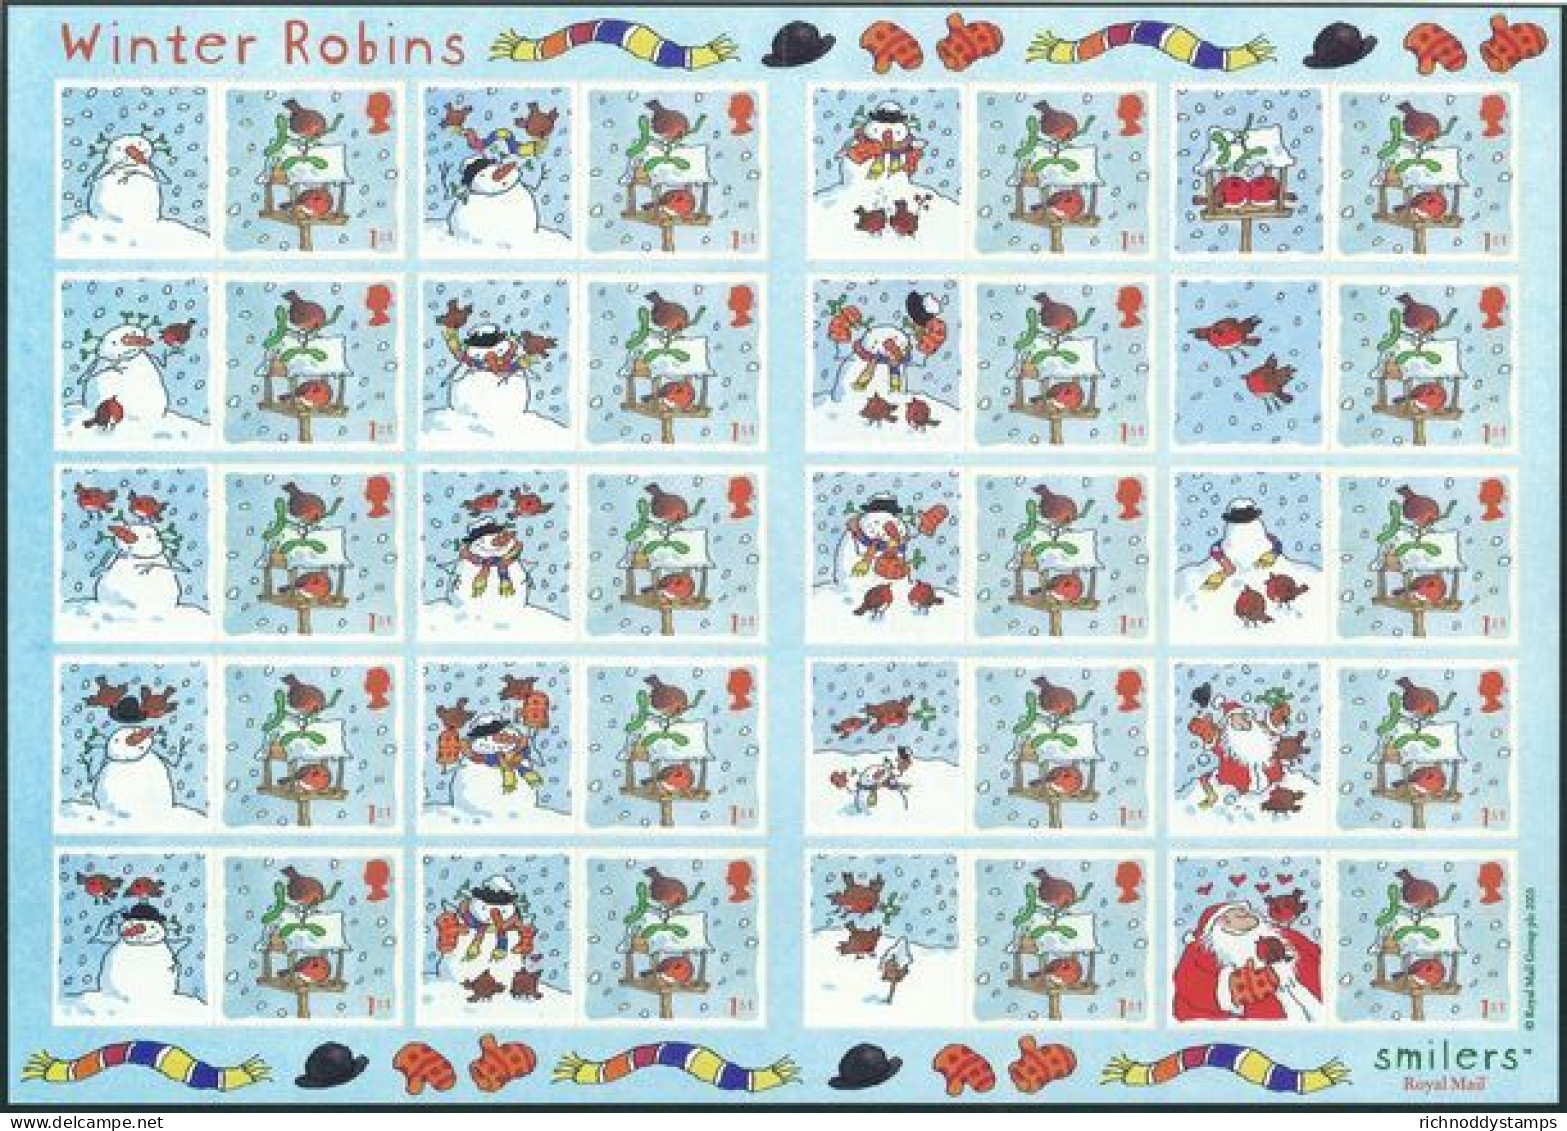 2003 Winter Robins Smilers Sheet Unmounted Mint.  - Smilers Sheets